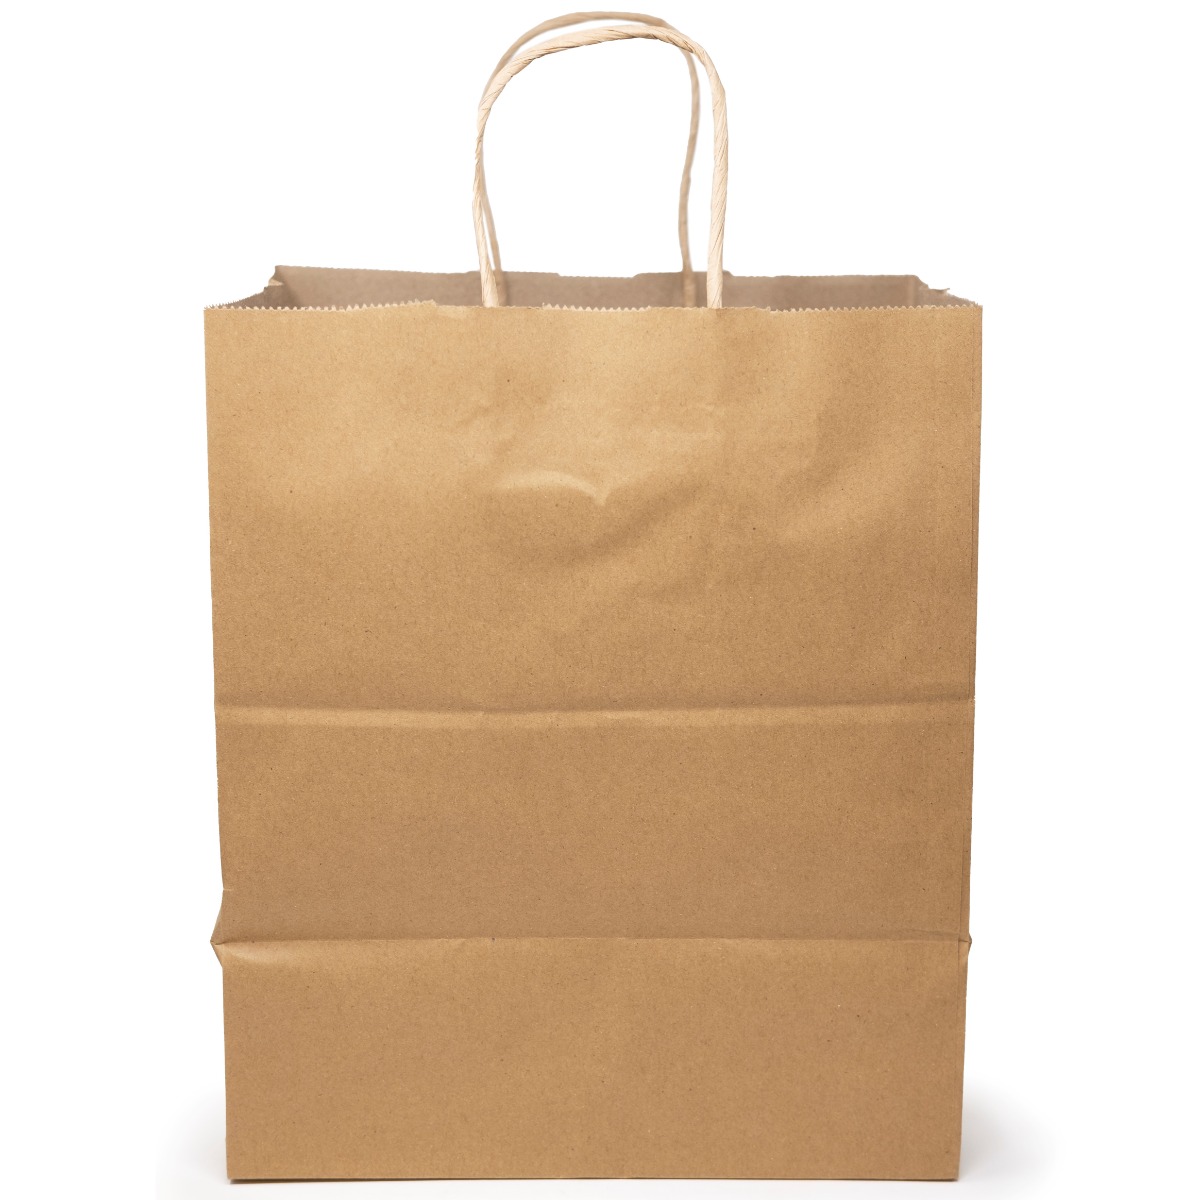 [ 20 Count ] Regular Roaster Storage Bag 16 x 18, 3.5 Gallon Large &  Strong Clear - Zipper Top - Bags